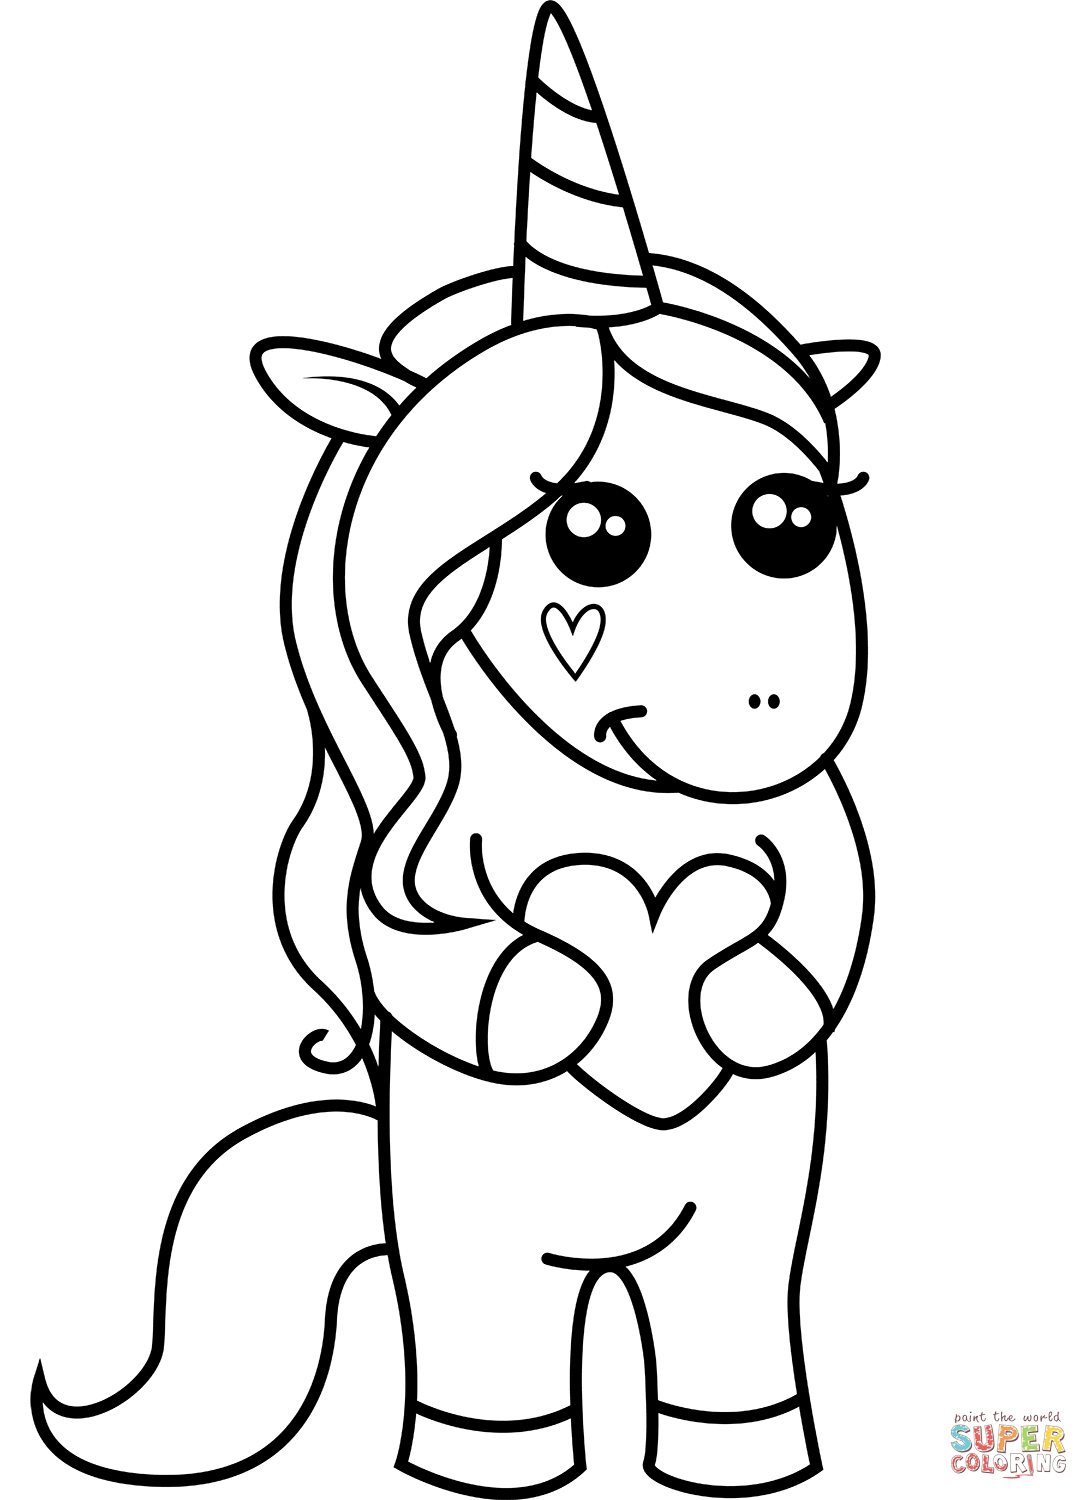 Saint valentines unicorn coloring page free printable coloring pages